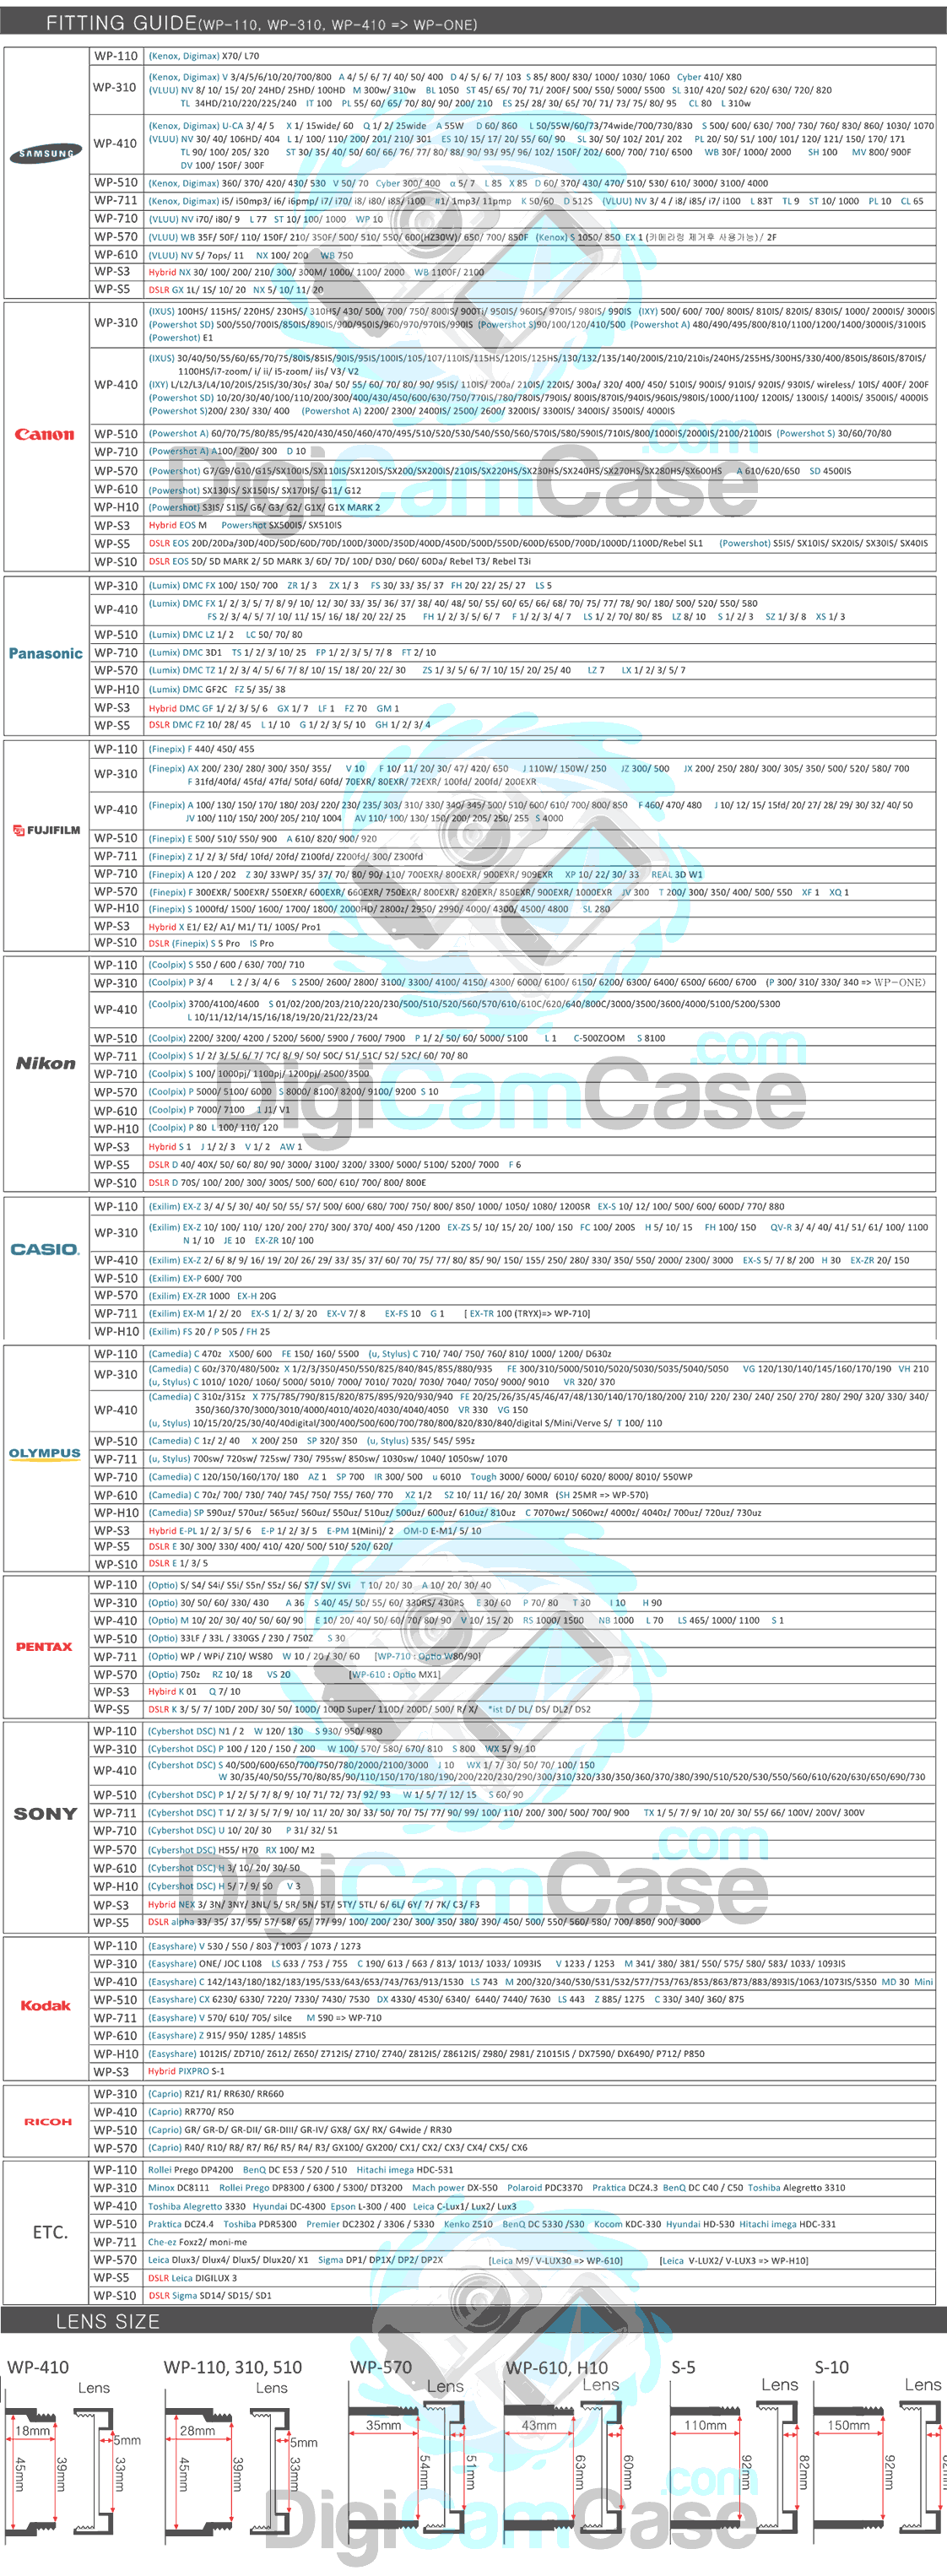 dicapac fitting guide